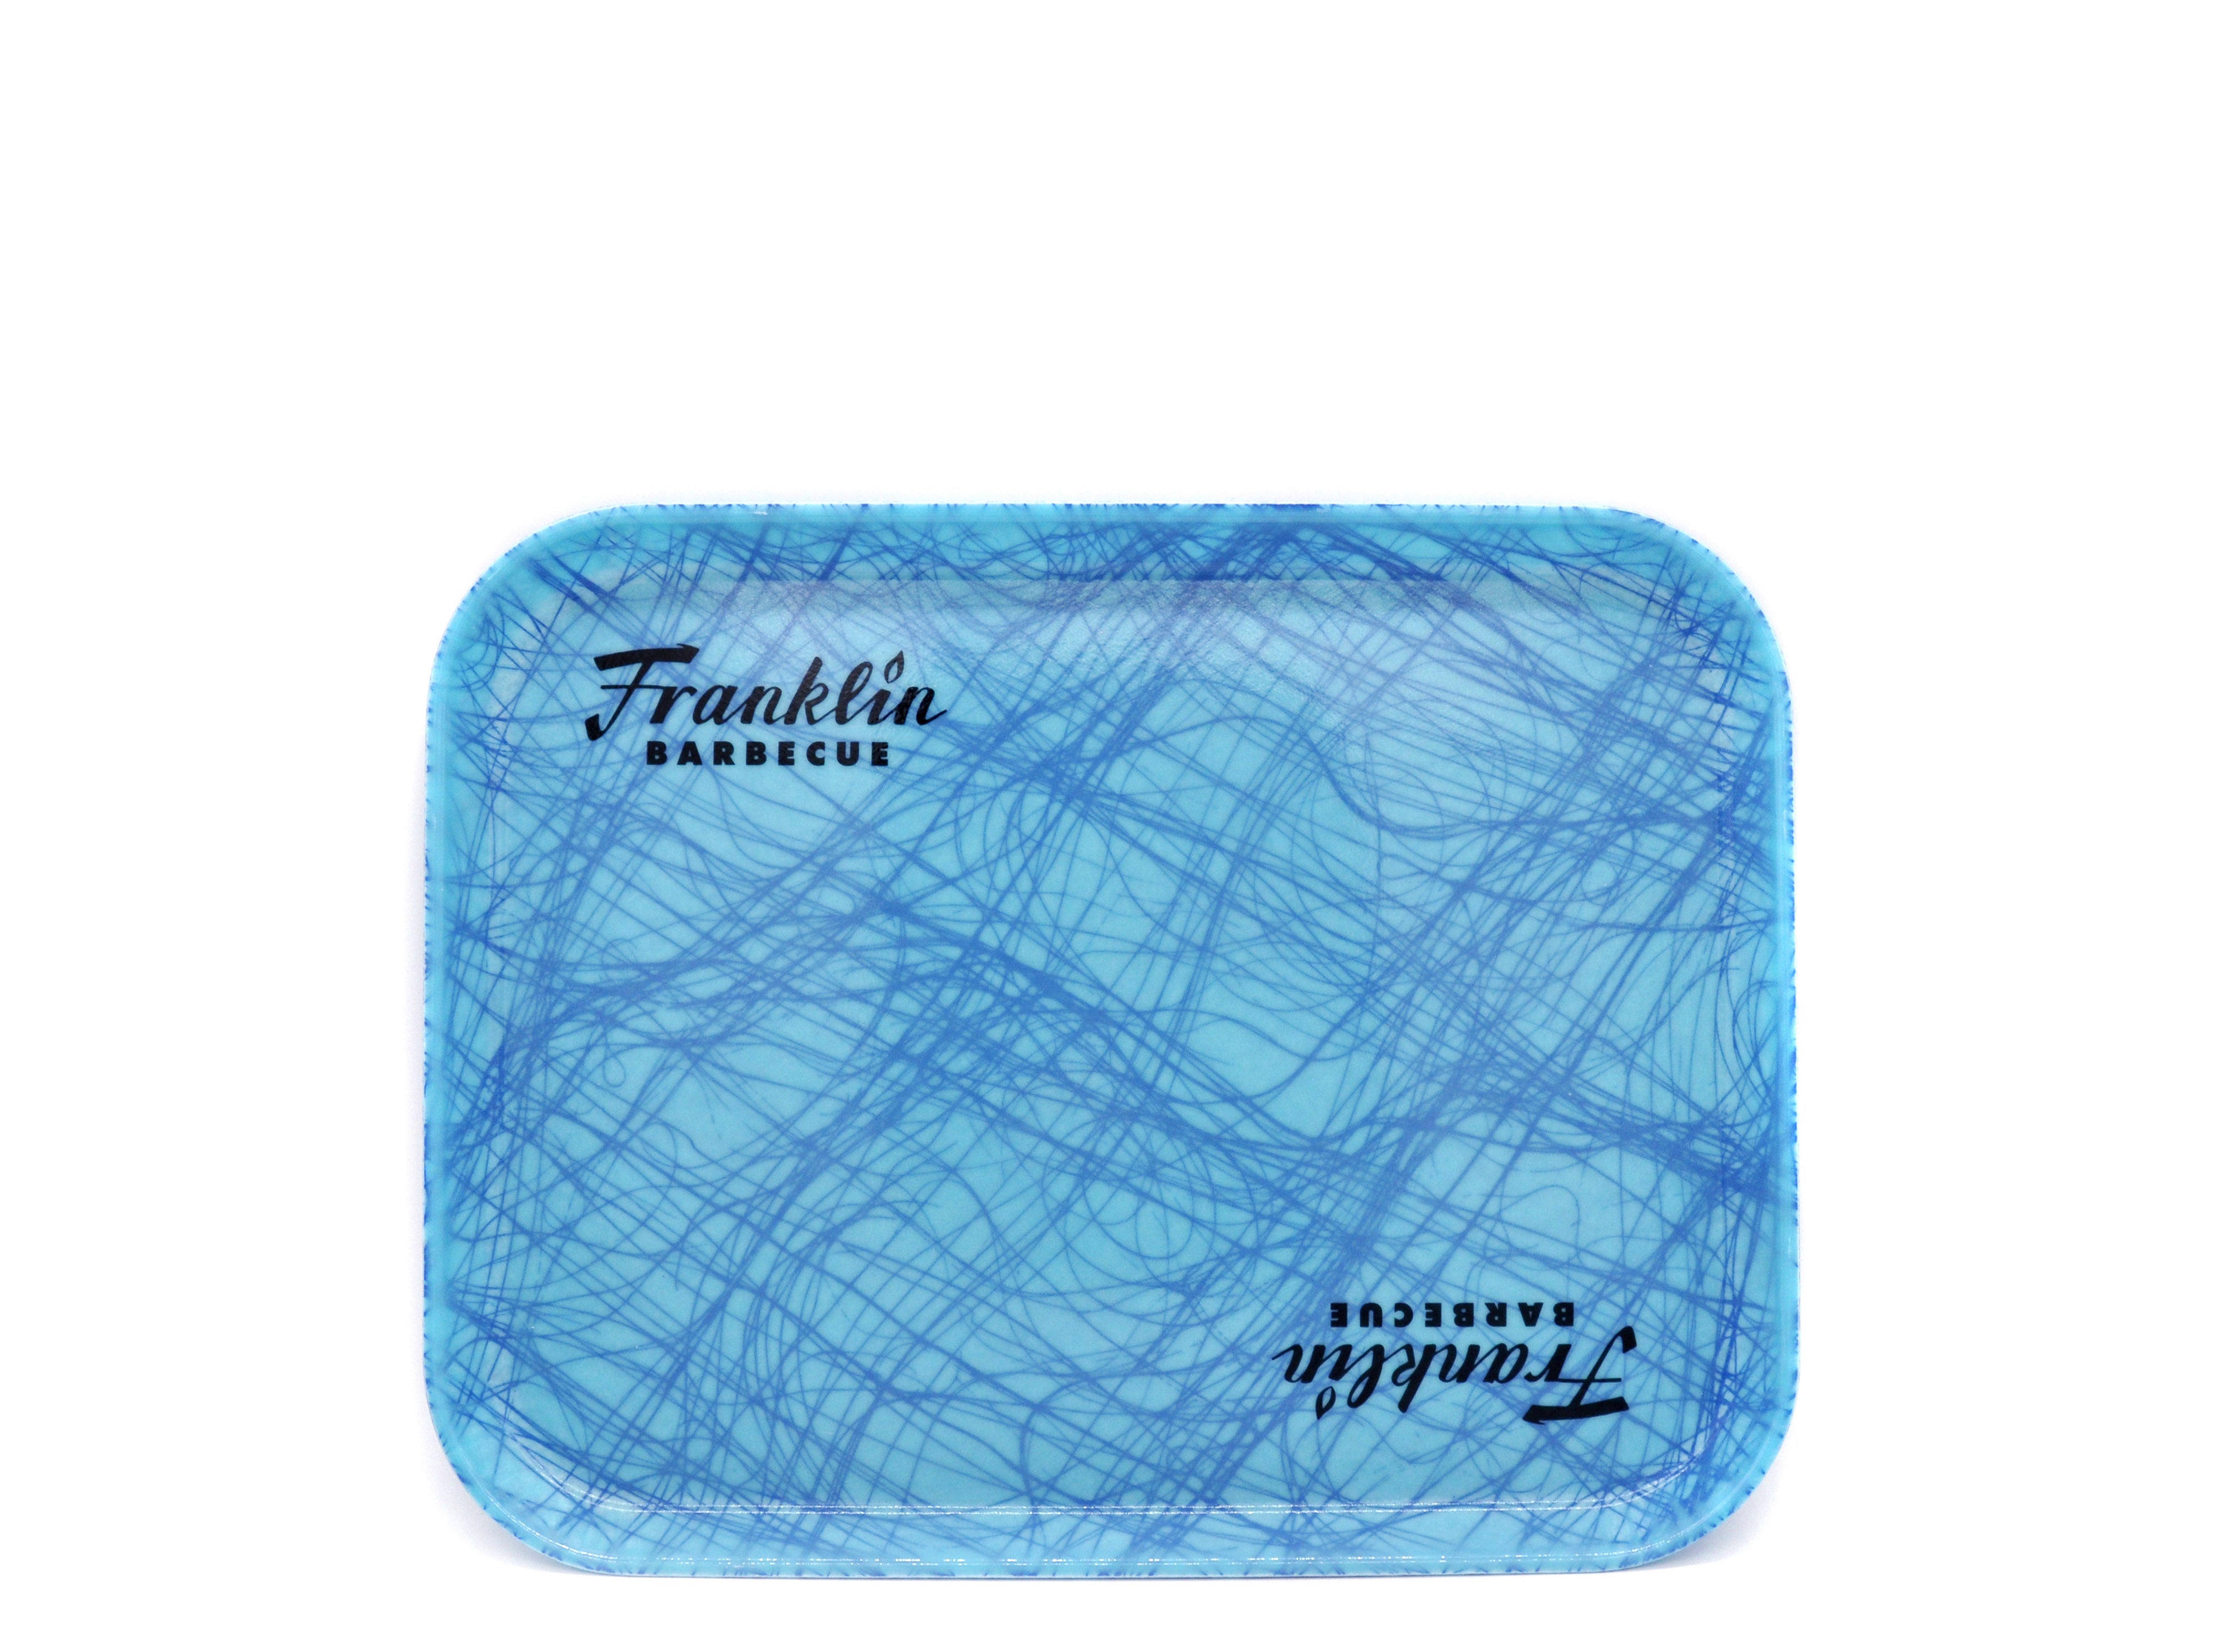 Large Franklin Barbecue Cafeteria tray in a swirled blue pattern. The Franklin logo is printed in black in the upper left corner and is mirrored in the lower right corner.